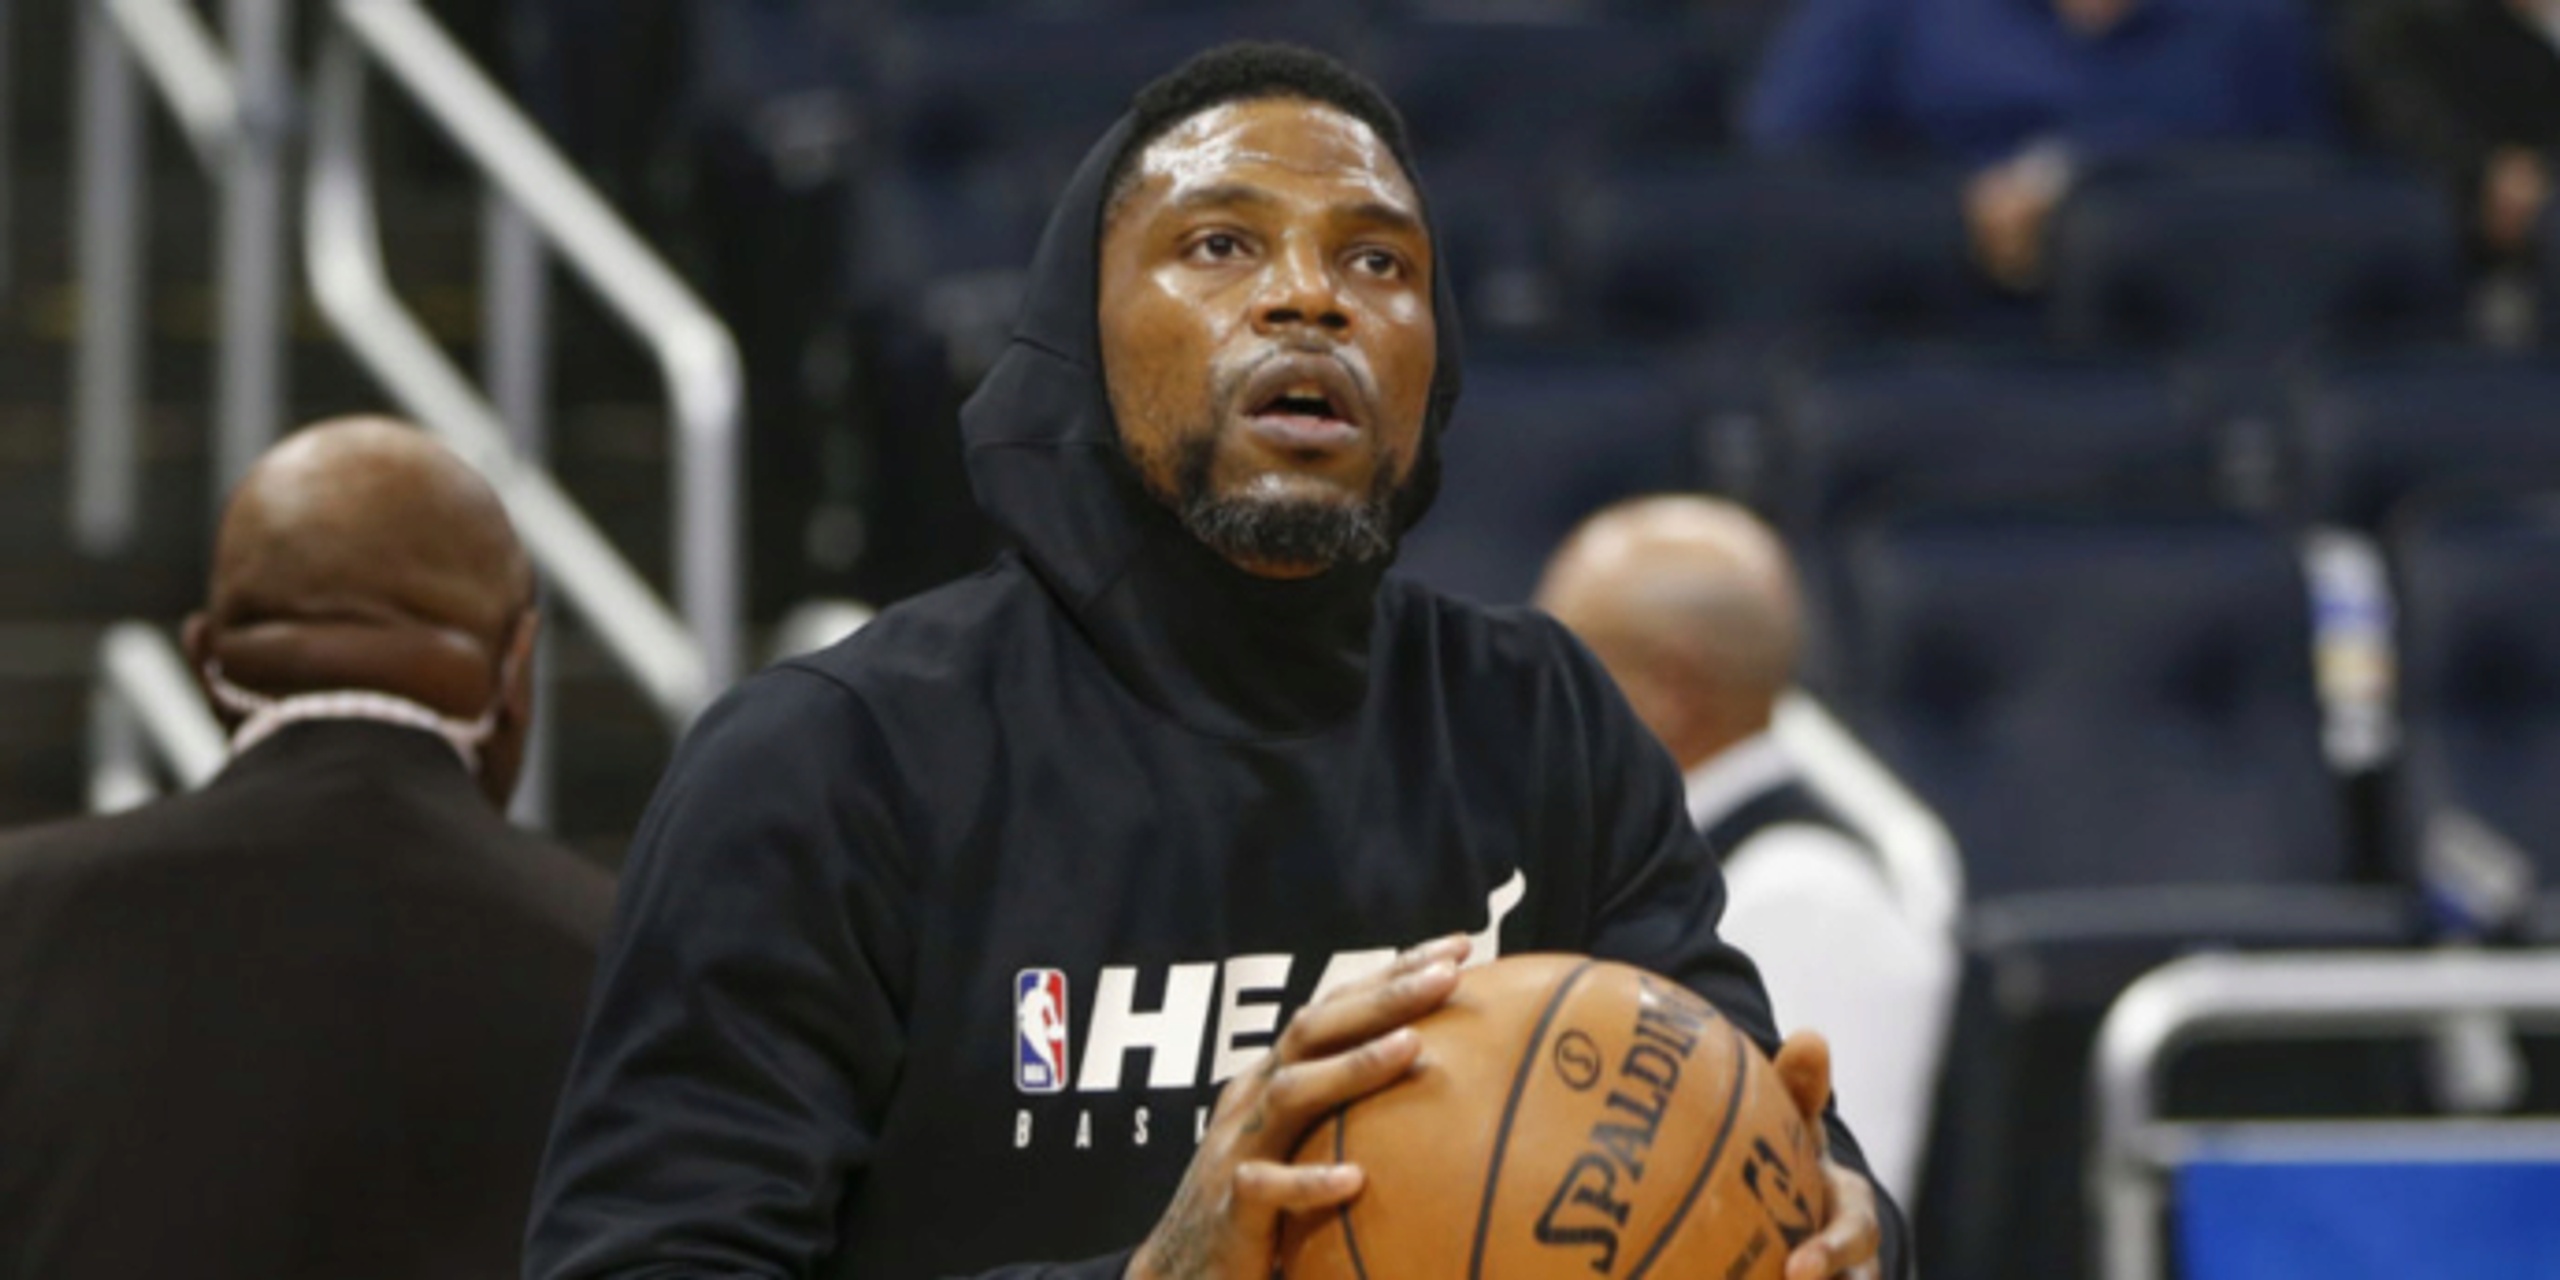 Udonis Haslem: 'Everybody can't handle' pressure of playing with LeBron